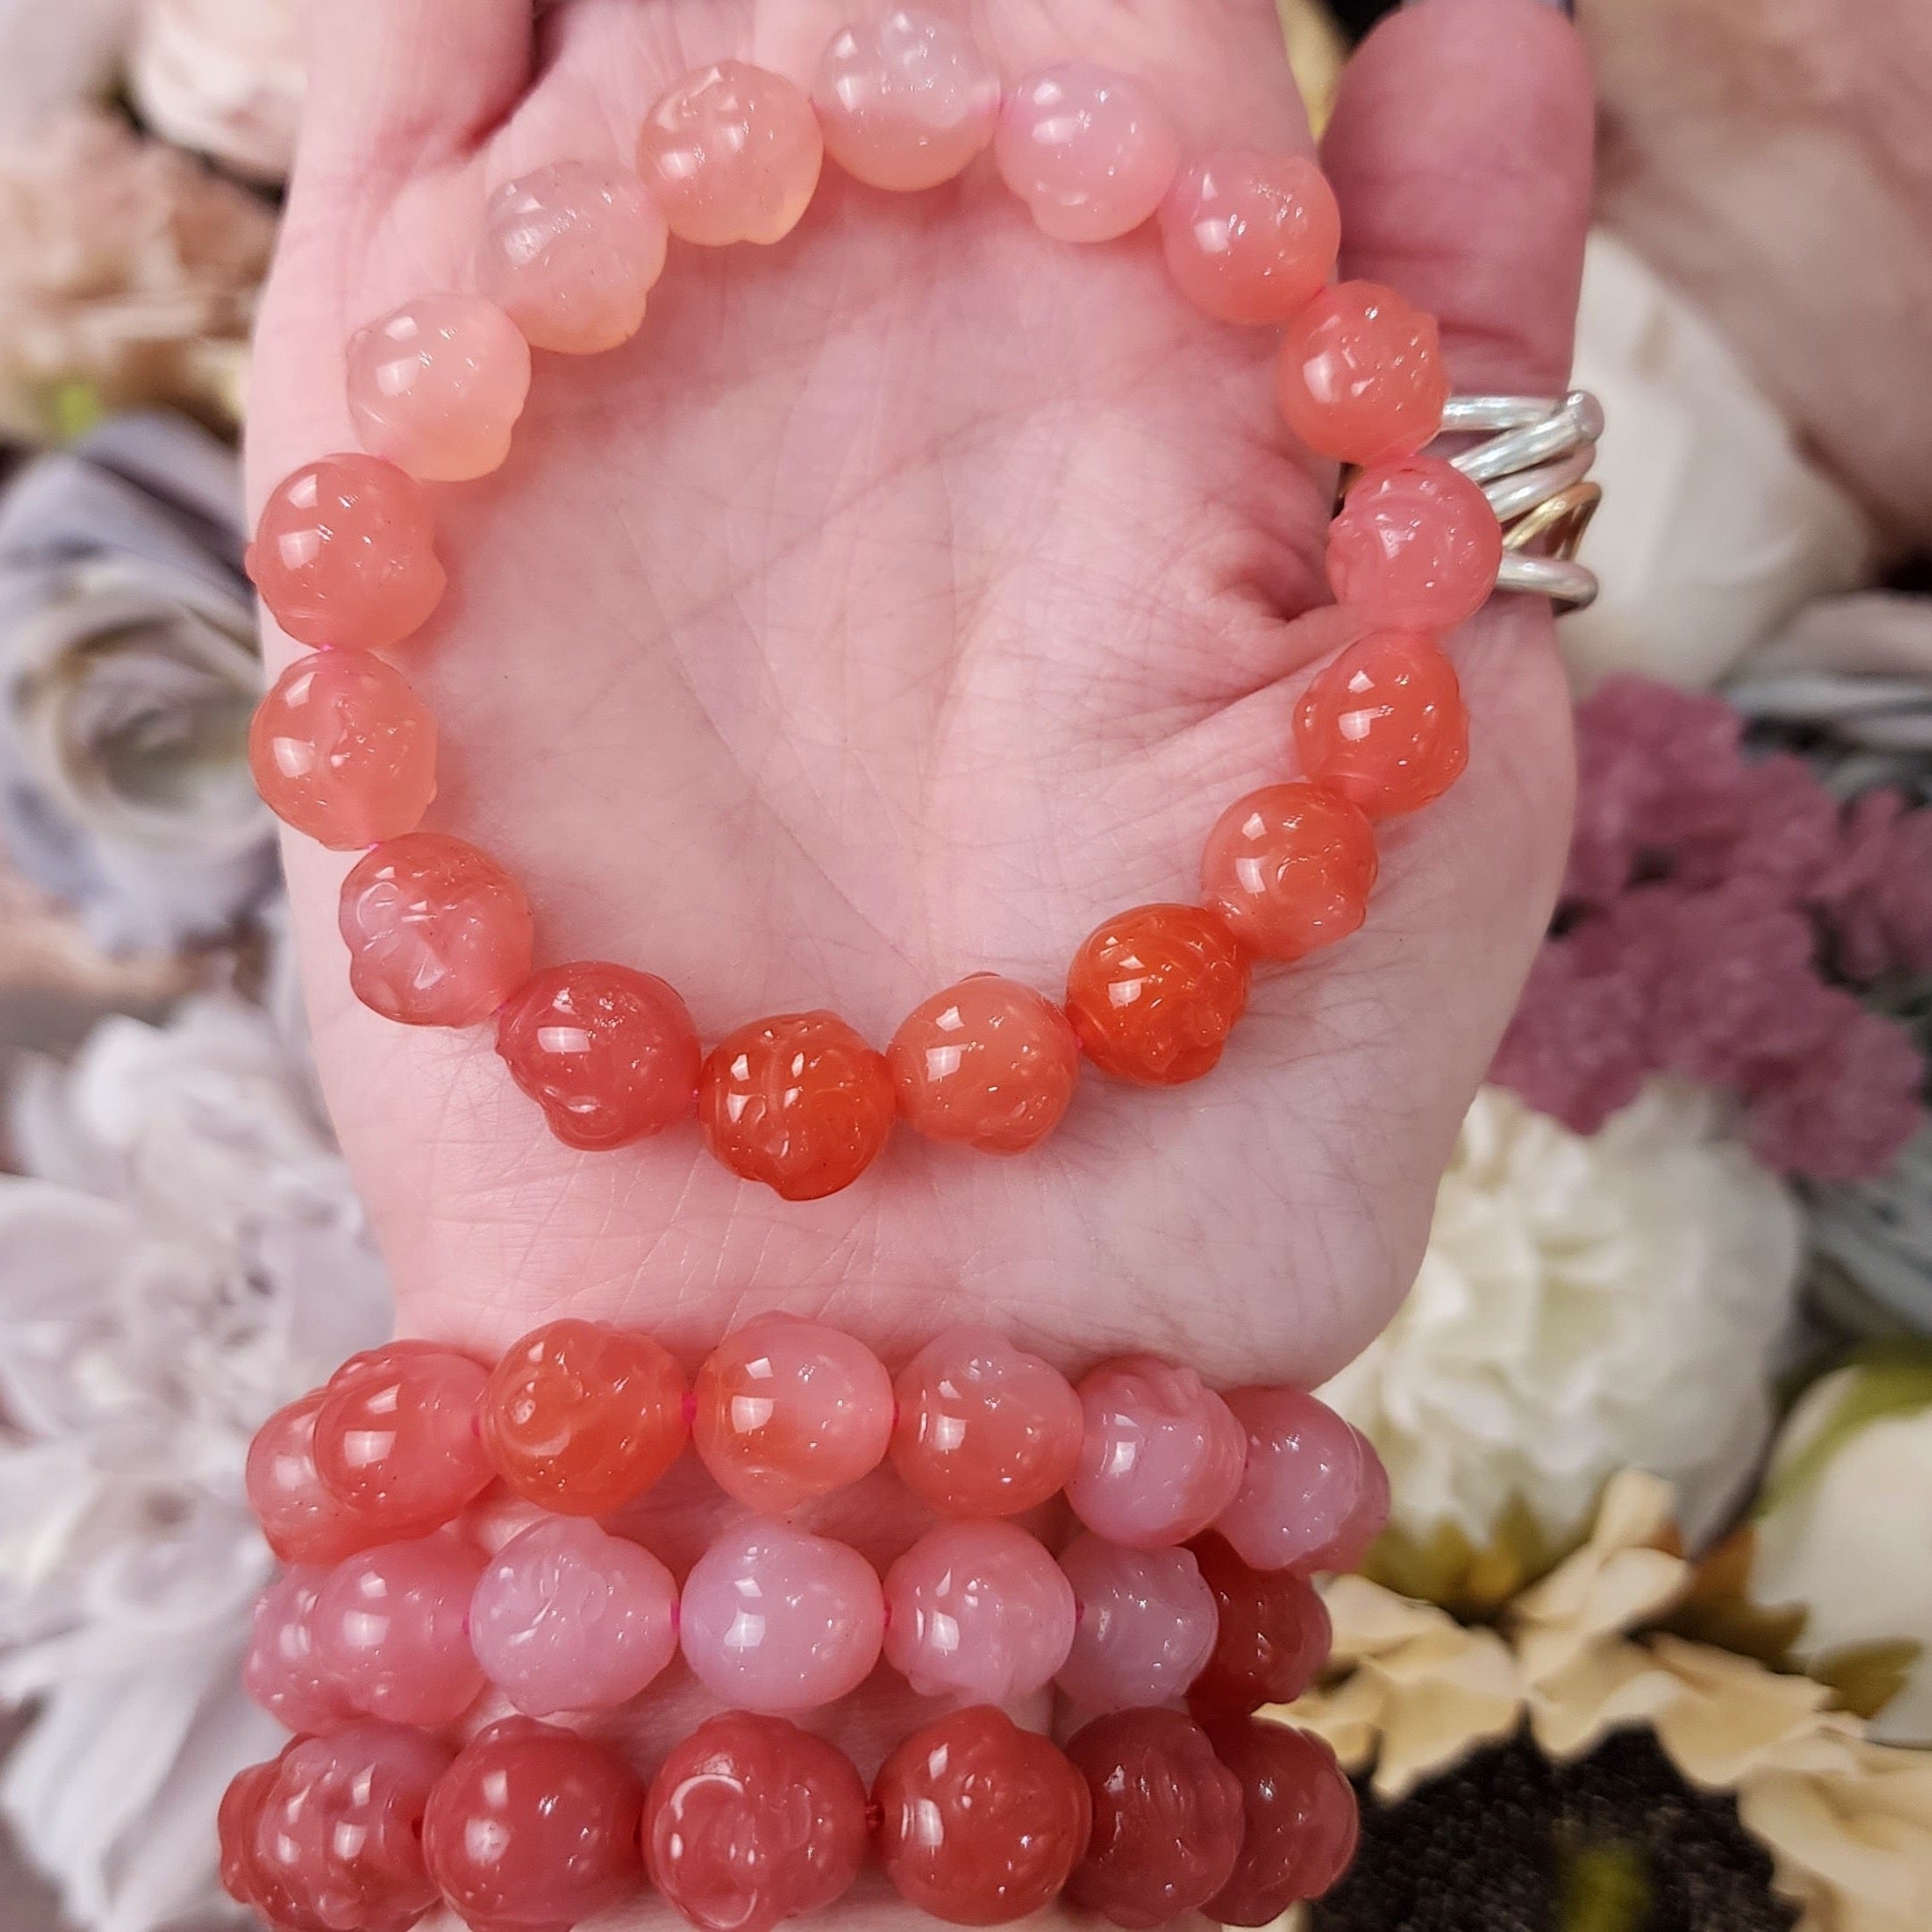 Yanyuan Agate Laughing Buddha Bracelet for Achieving Goals, Confidence and Health